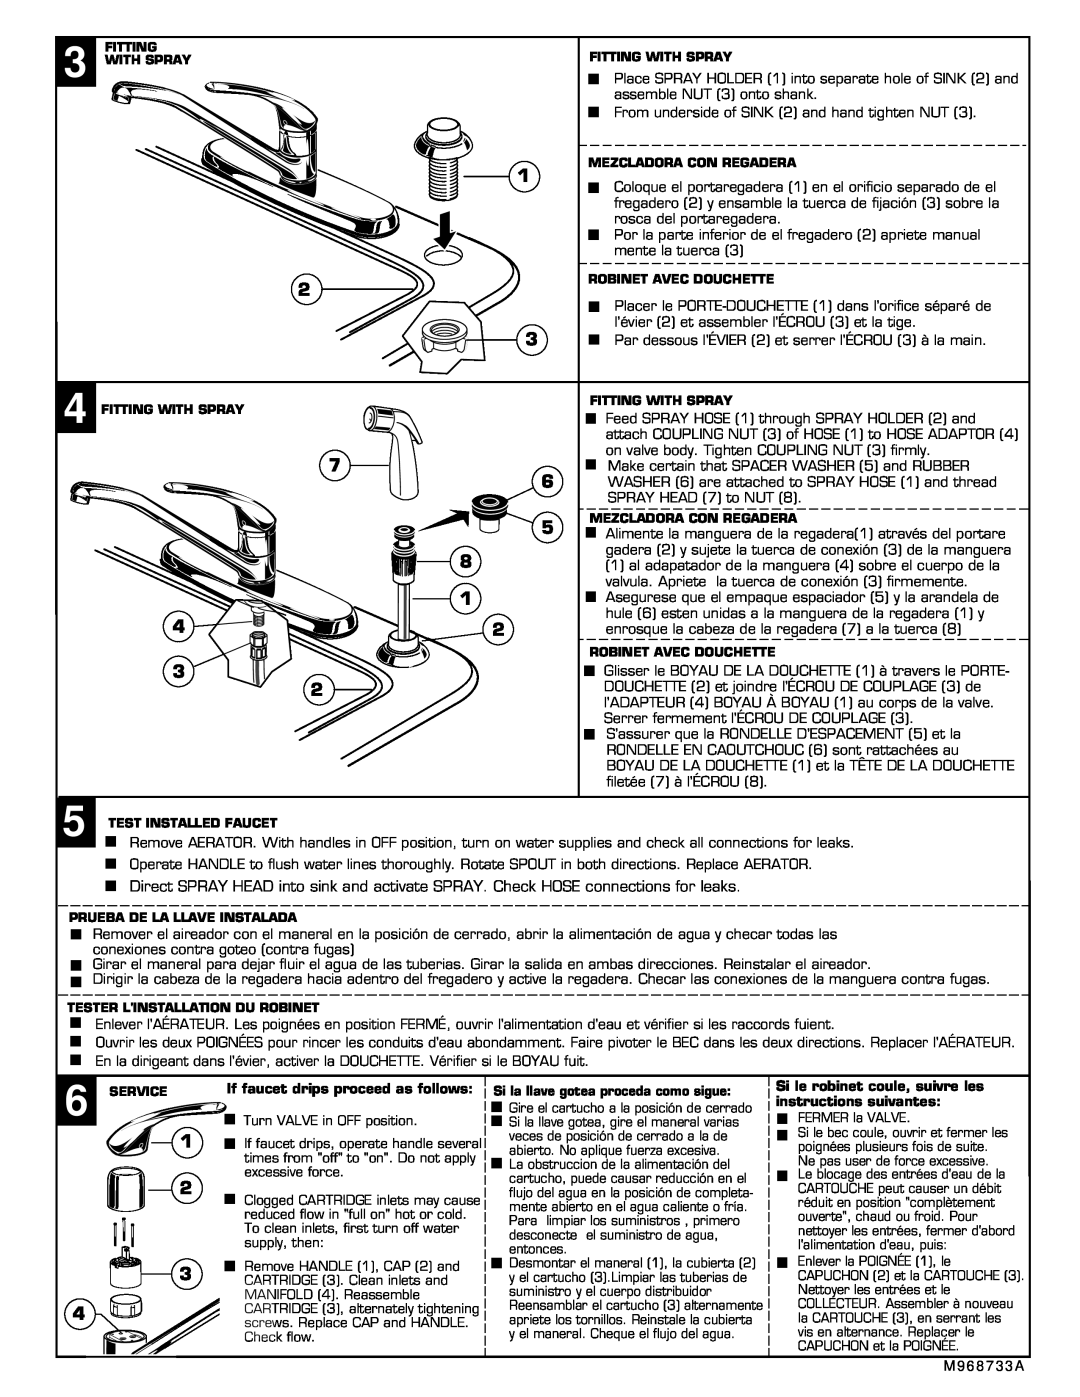 American Standard 4175.501, 4175.500 installation instructions 1 2 3, If faucet drips proceed as follows 